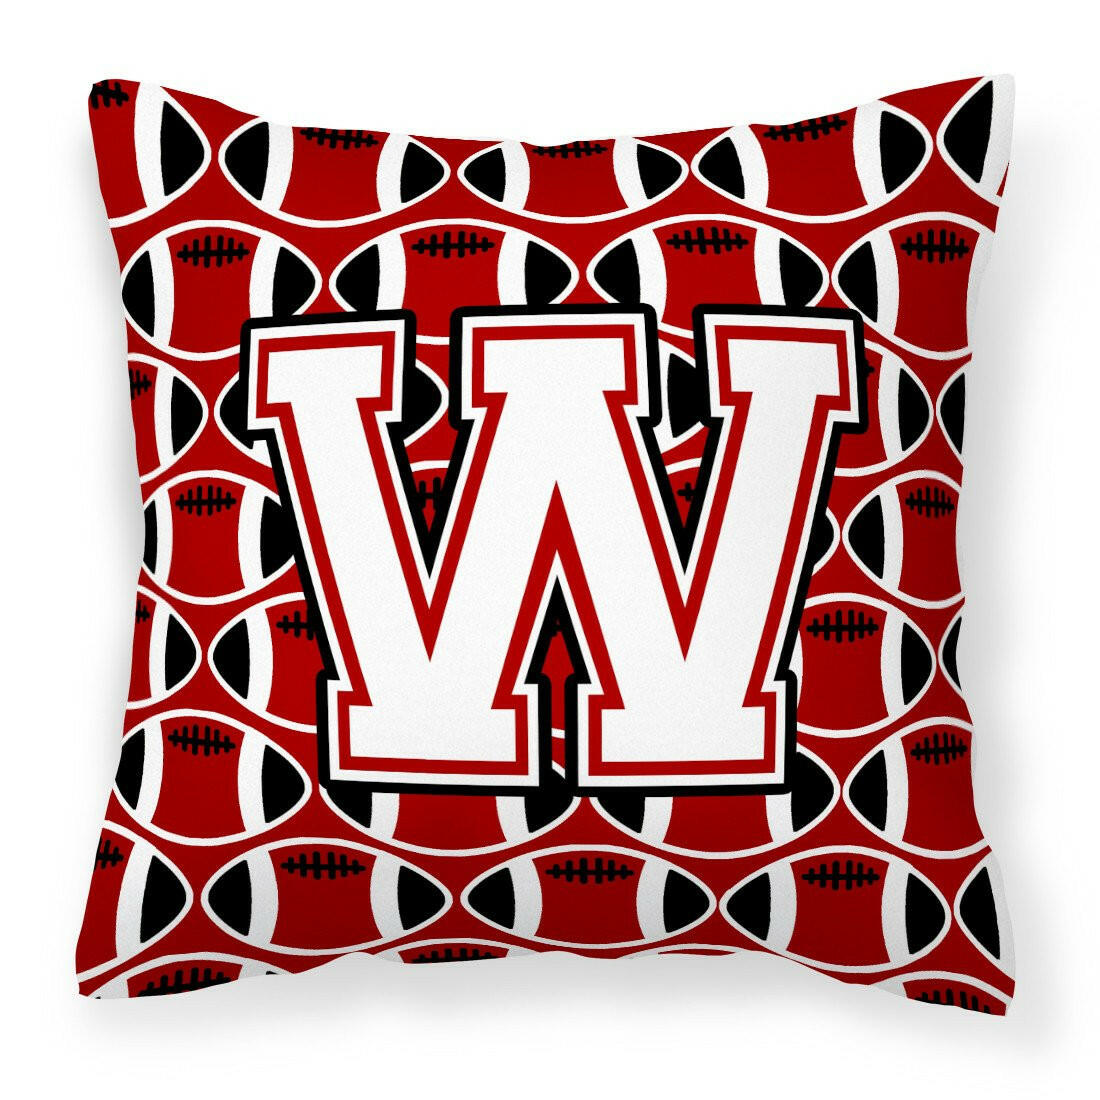 Letter W Football Cardinal and White Fabric Decorative Pillow CJ1082-WPW1414 by Caroline's Treasures